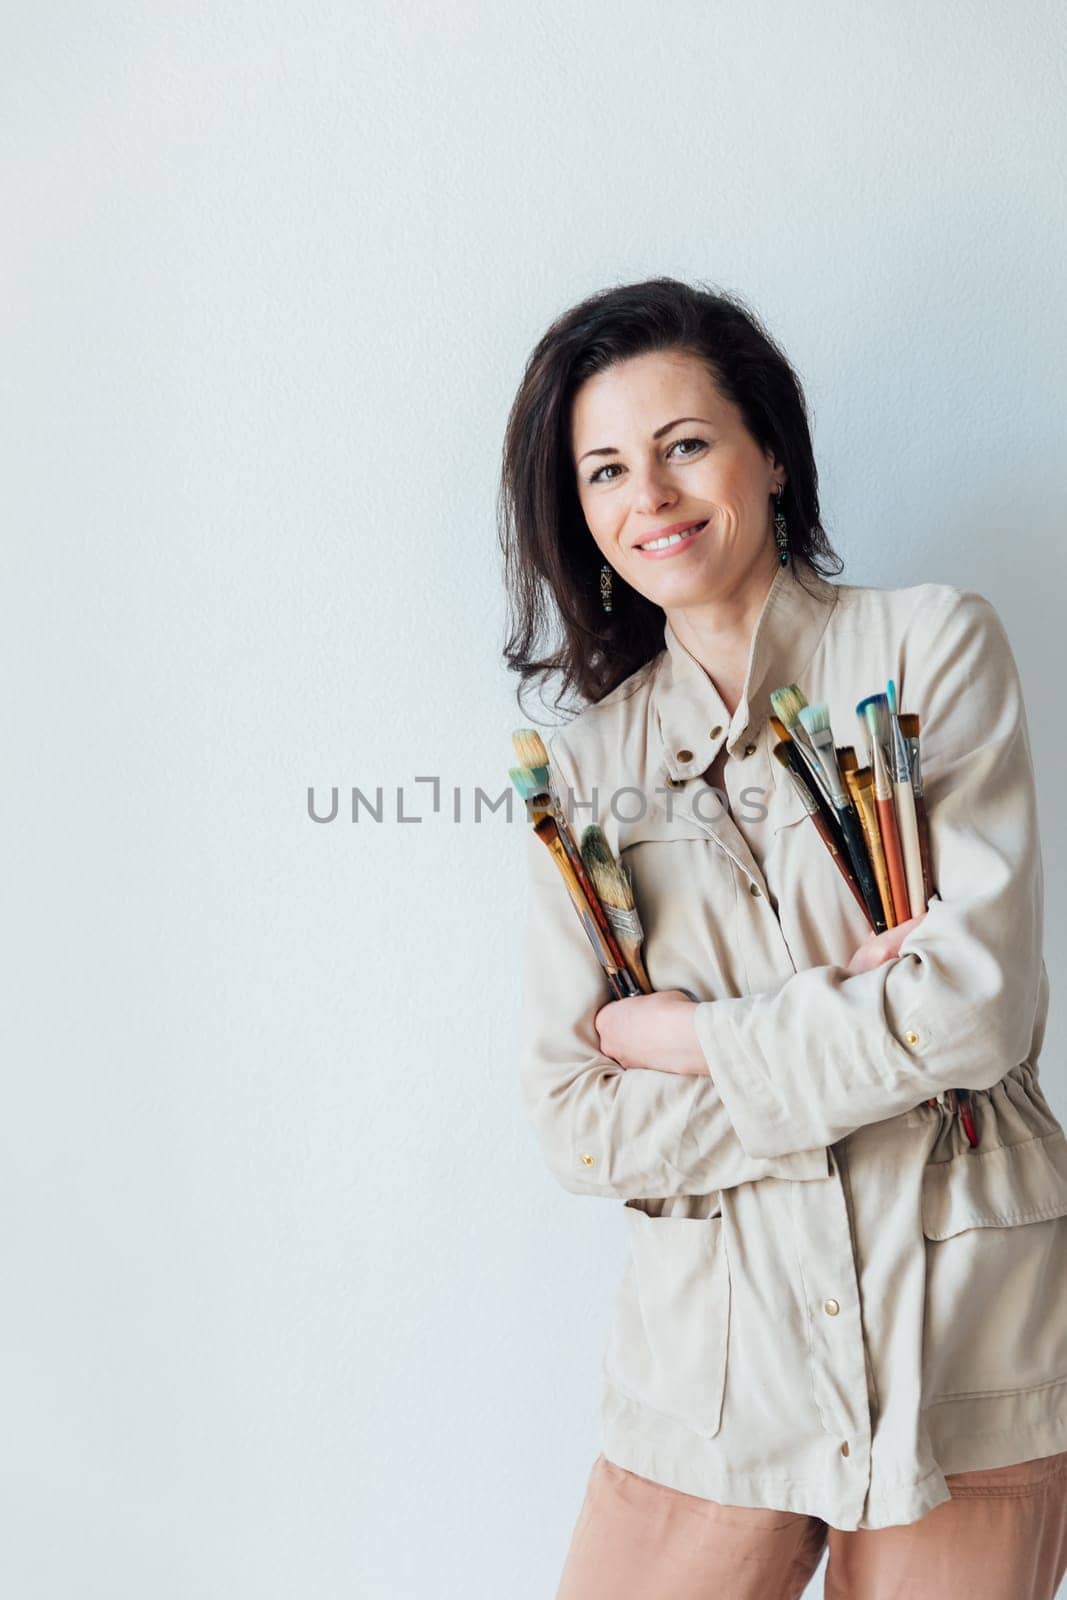 Brunette woman with art brushes on white background by Simakov